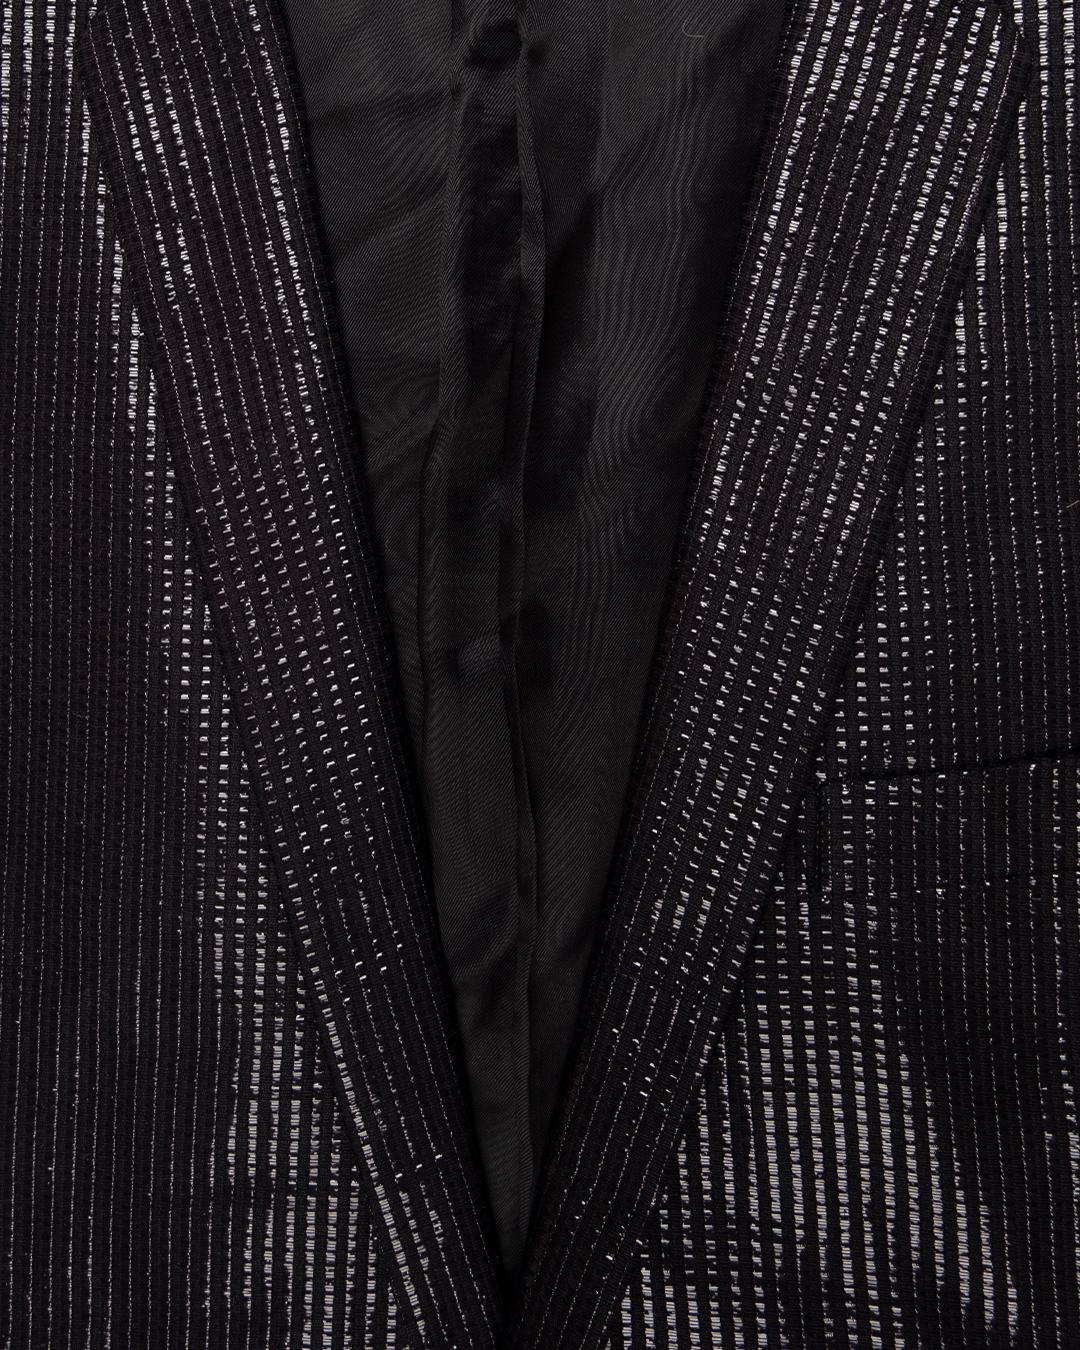 Dior Homme AW2009 Glitter Blazer In Excellent Condition For Sale In Beverly Hills, CA